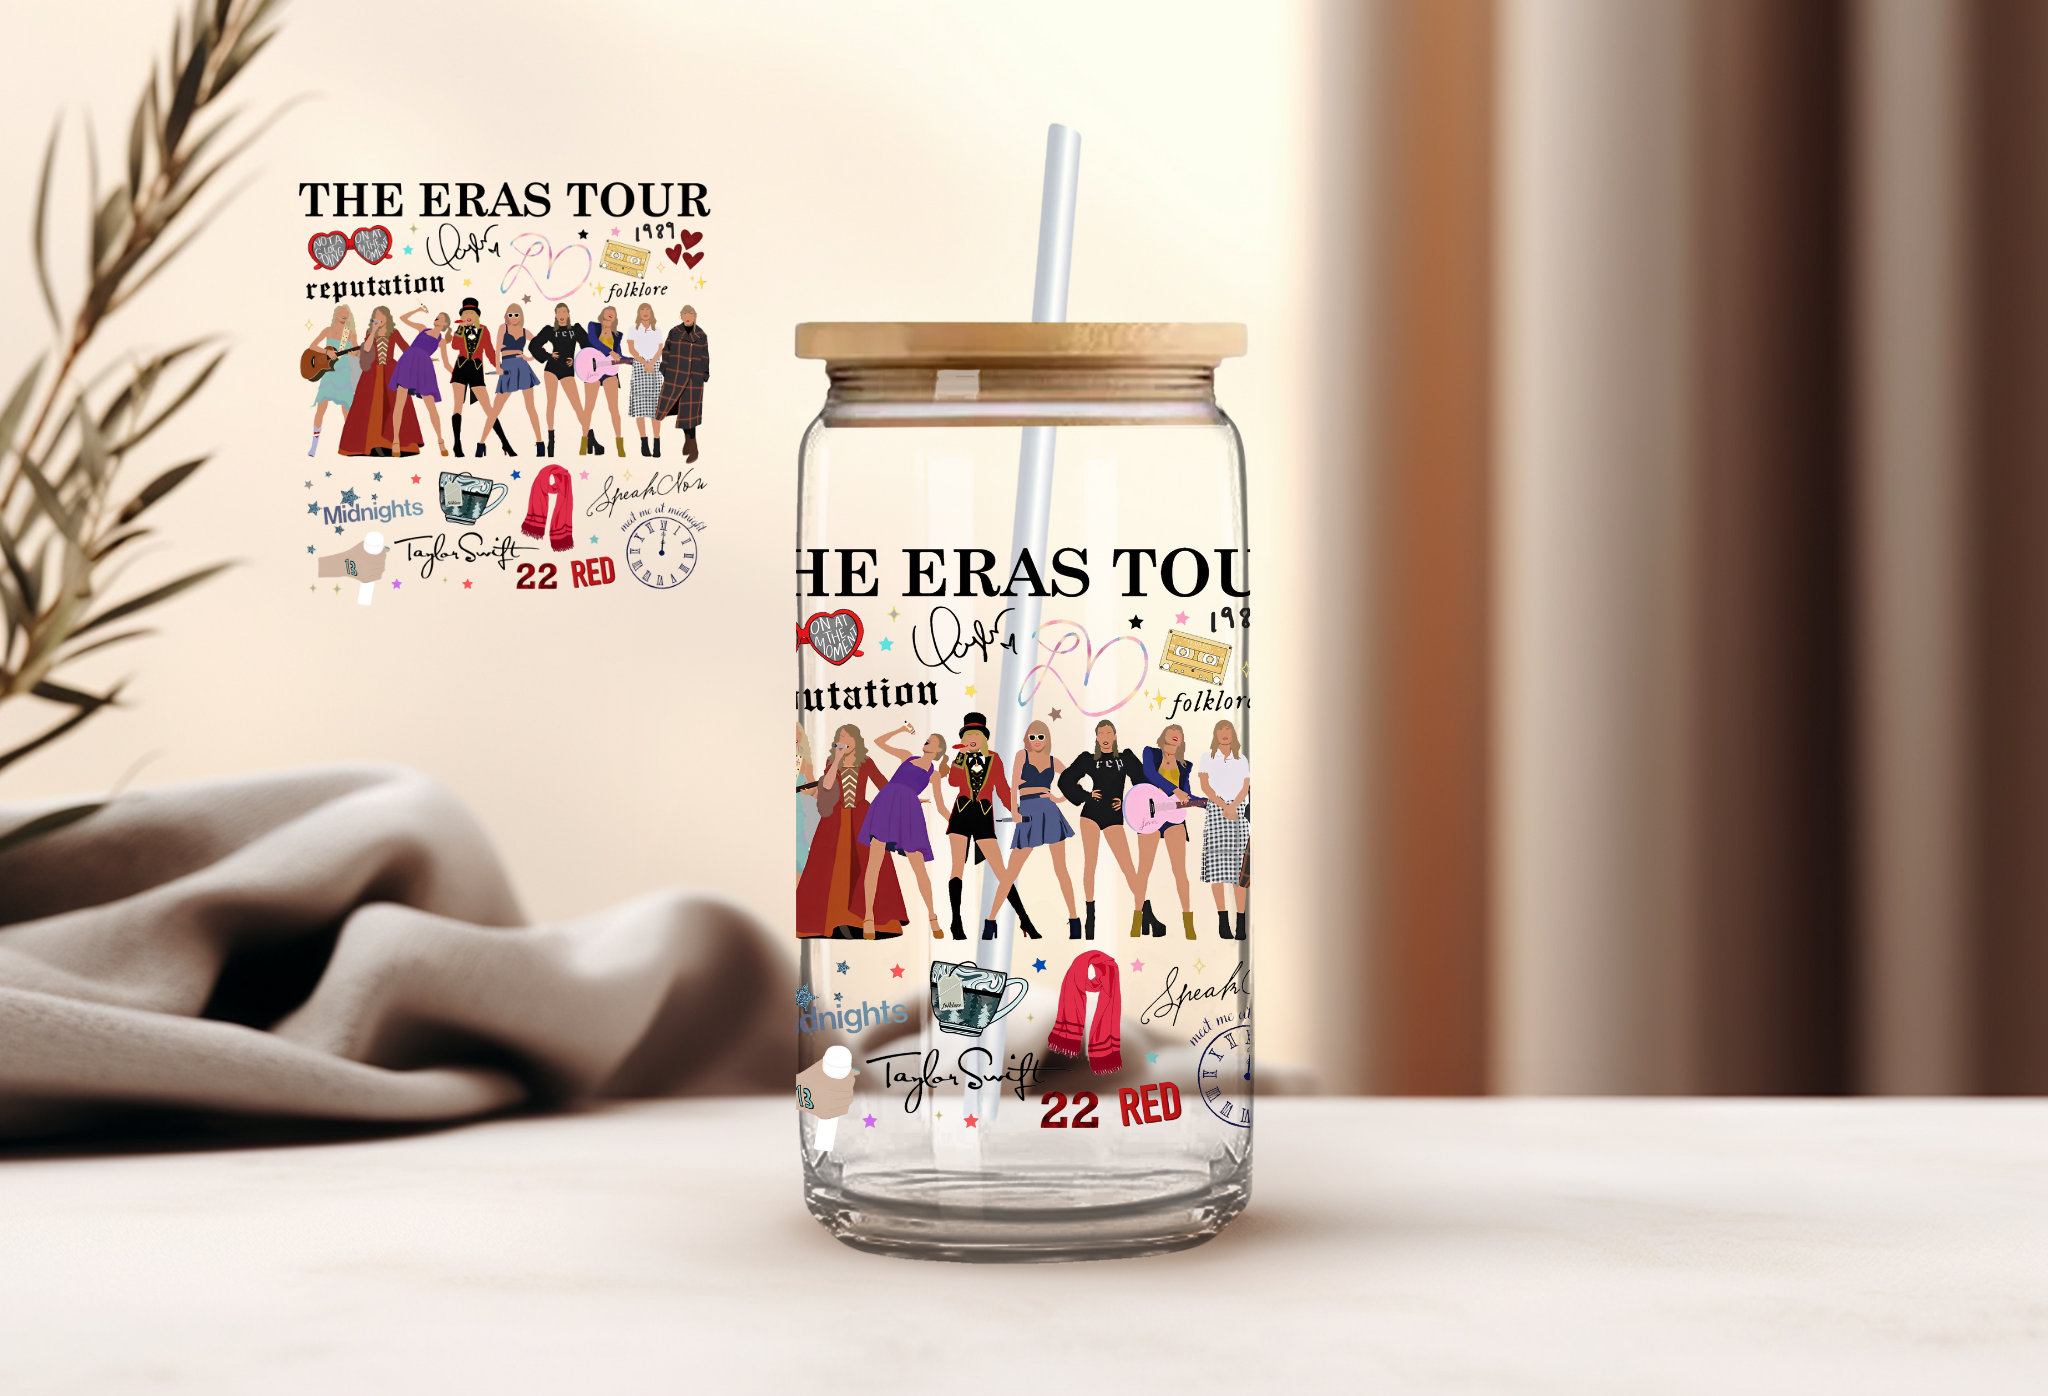 WECACYD Swiftea Coffee Tumbler- Cute Singer Taylor Album Novelty Taylor Cup  Gift for Singer Fans - F…See more WECACYD Swiftea Coffee Tumbler- Cute